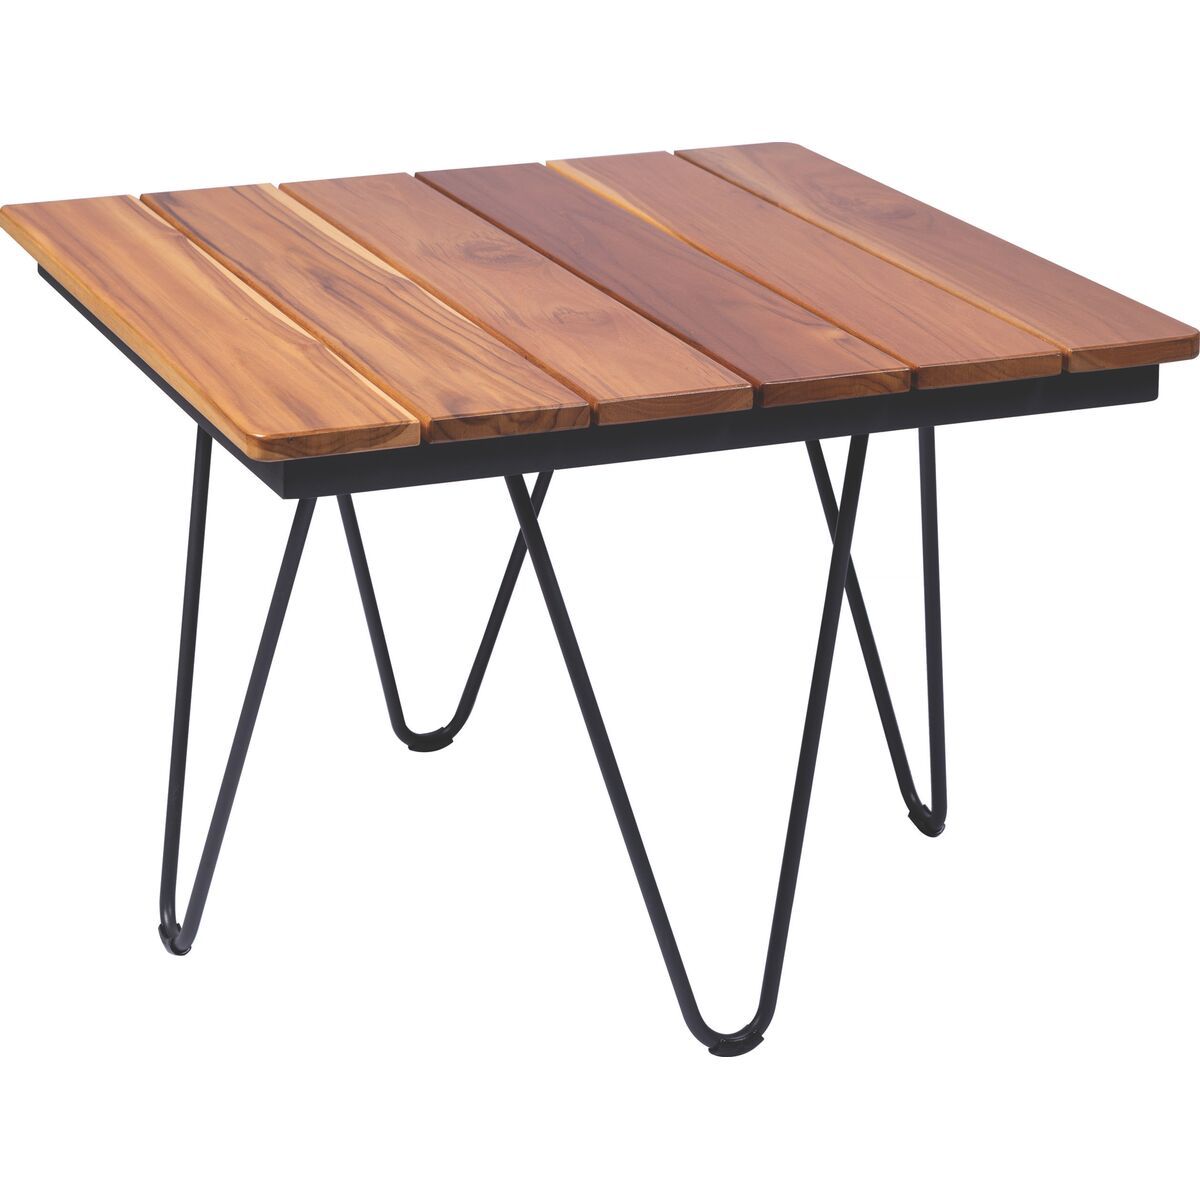 Tramontina Tarsila Coffee Table in Teak Wood with with Carbon Steel Structure and Graphite Ecoclear Finish